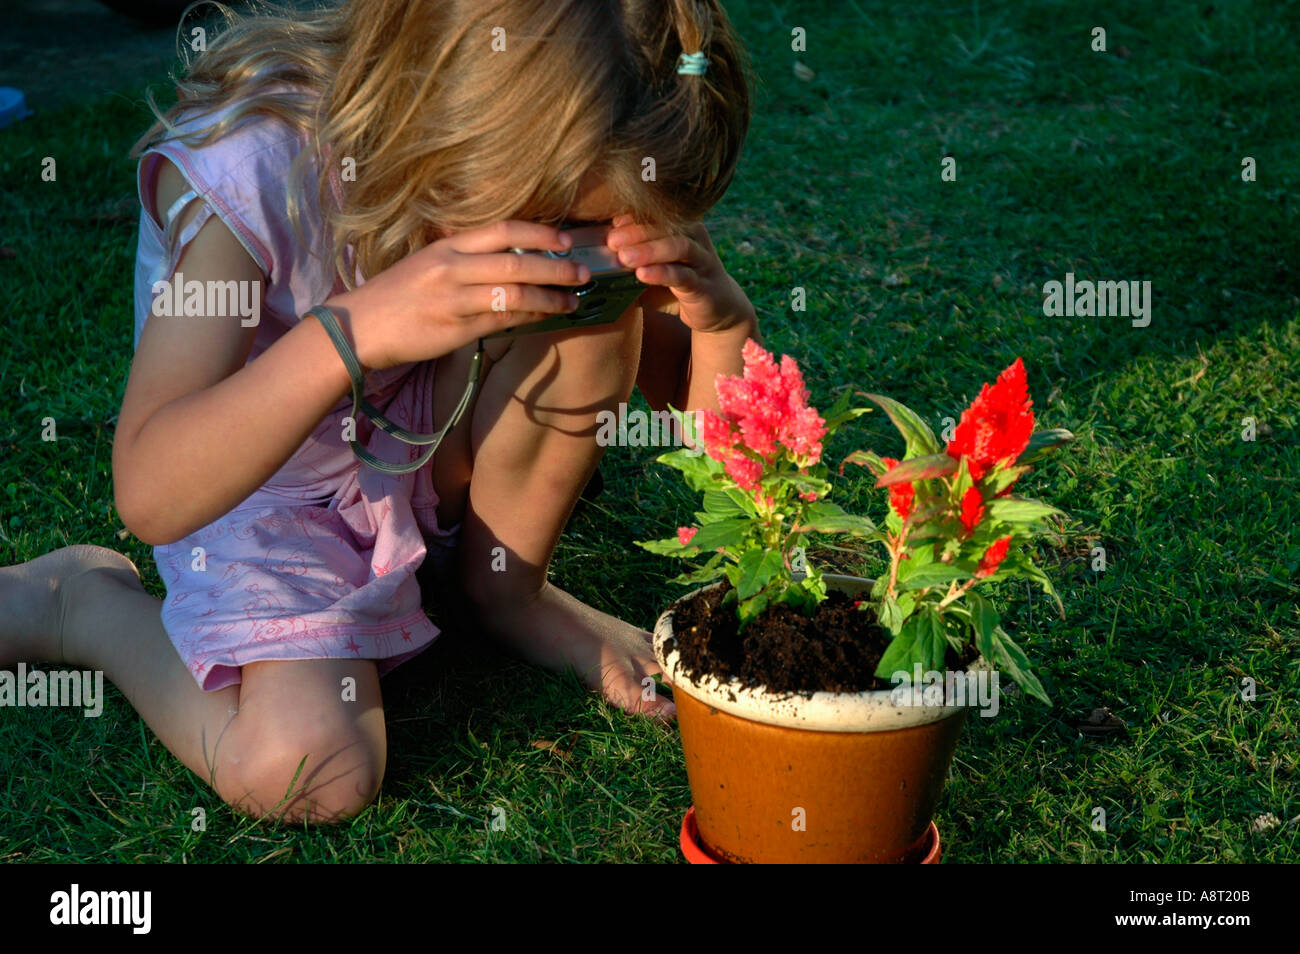 child taking photo of flowers with digital camera Stock Photo